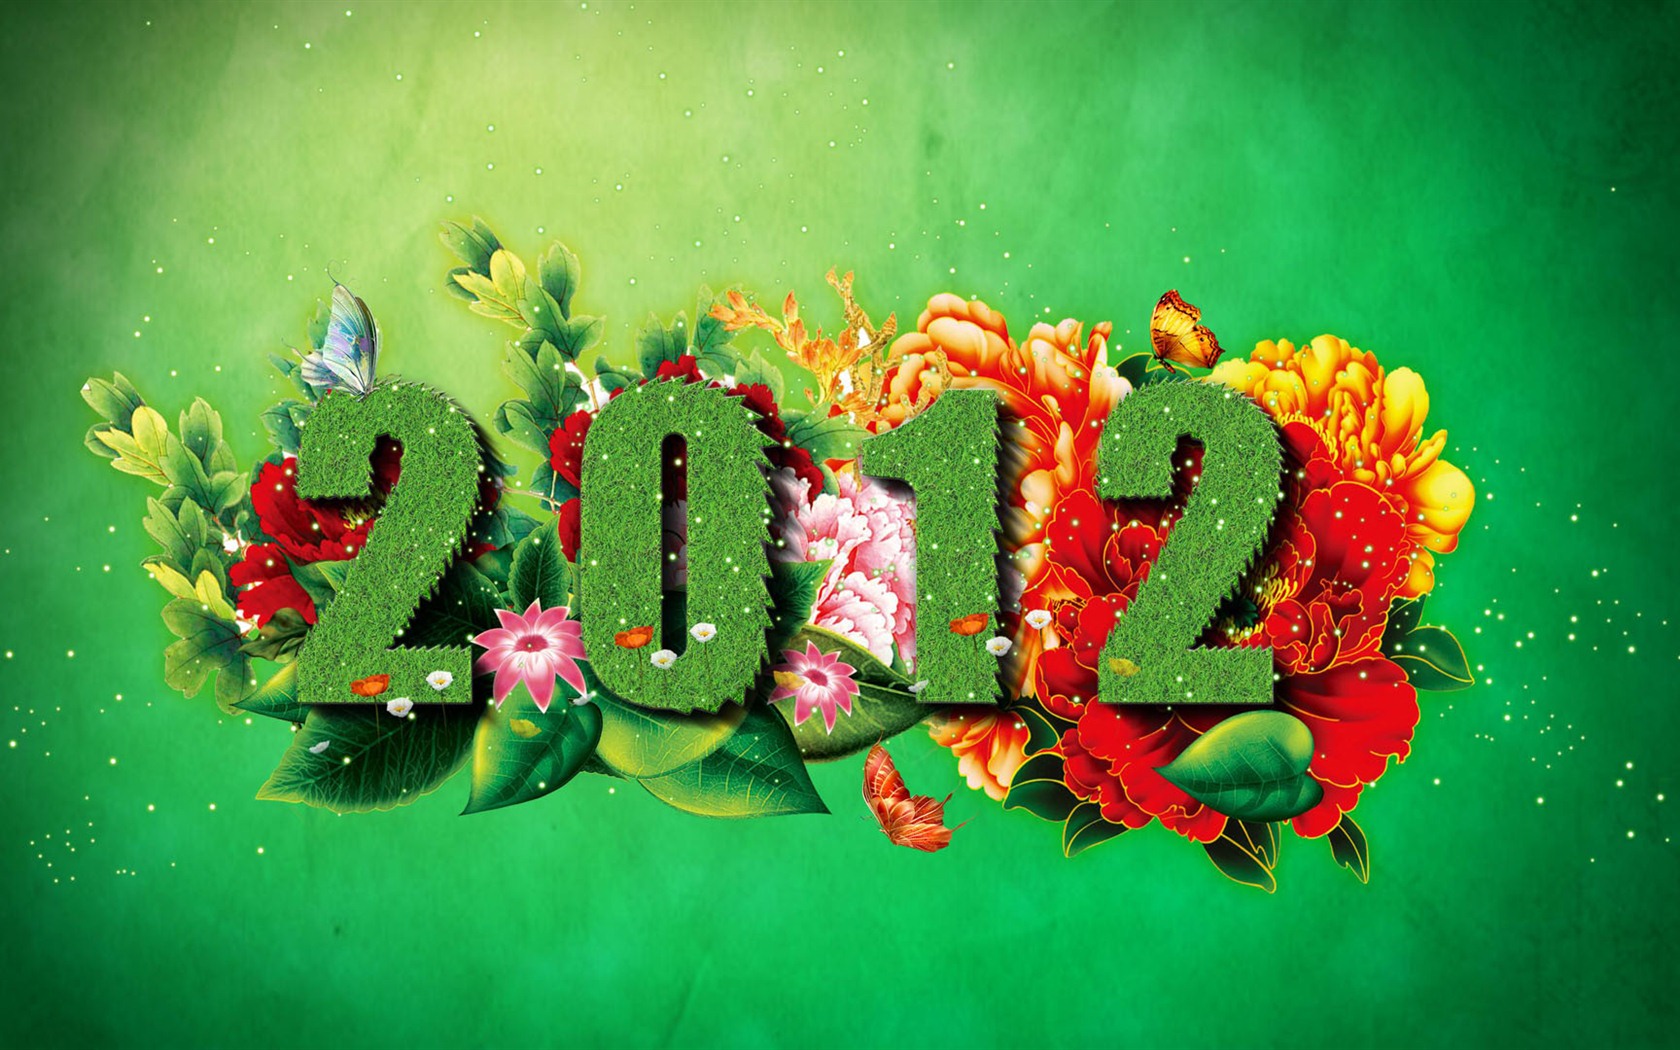 2012 New Year wallpapers (1) #19 - 1680x1050